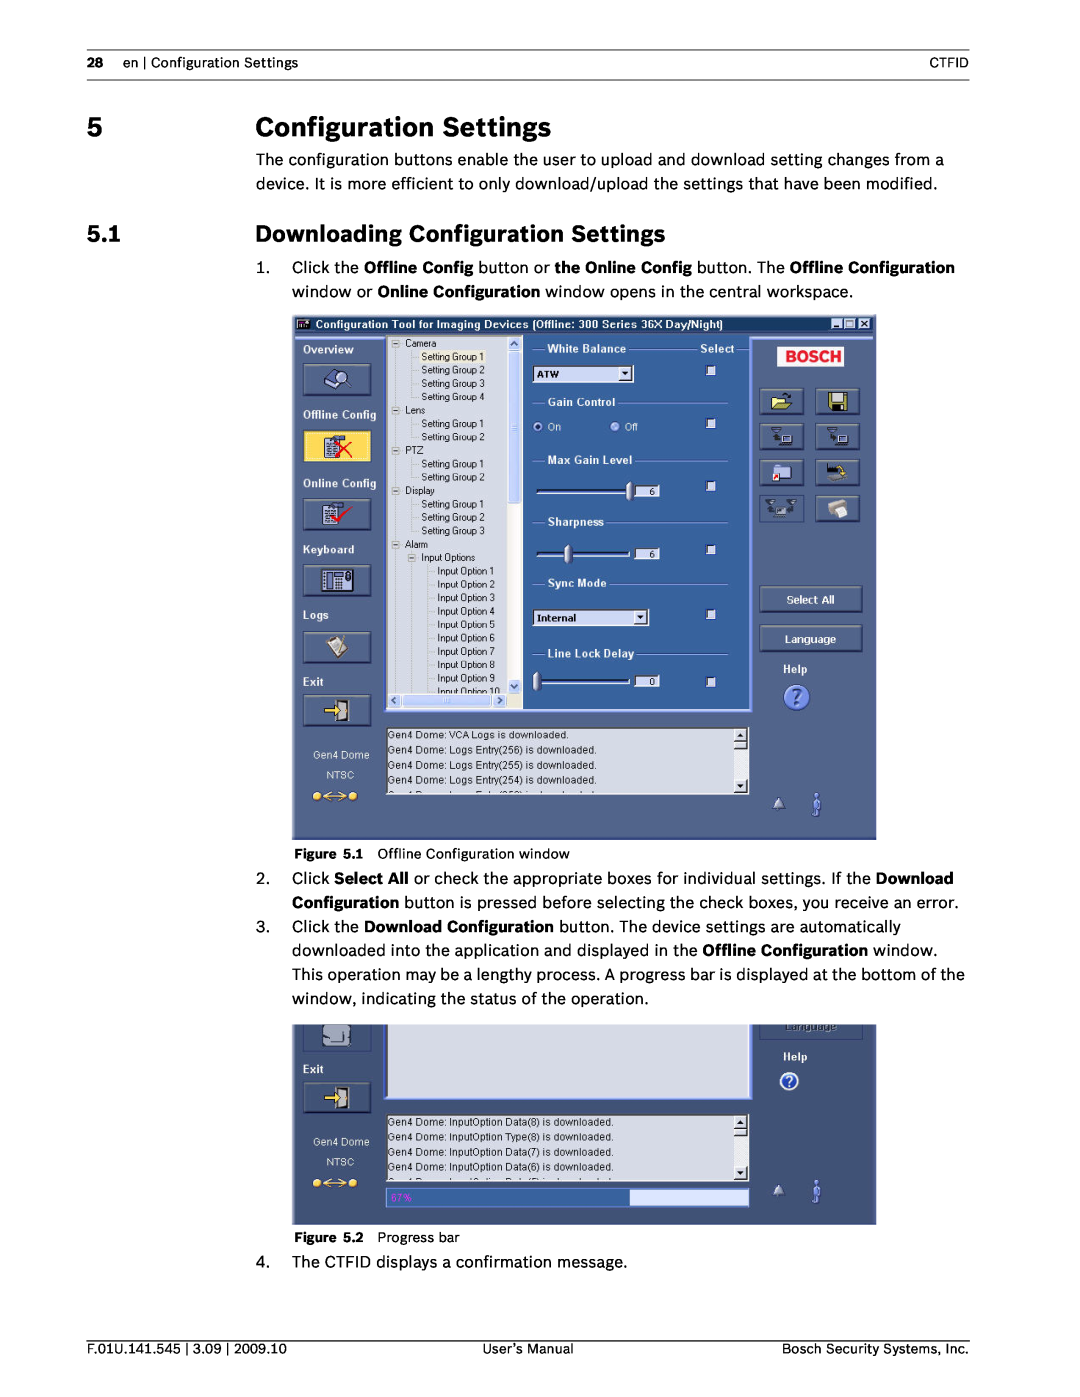 Bosch Appliances VP-CFGSFT user manual Downloading Configuration Settings 